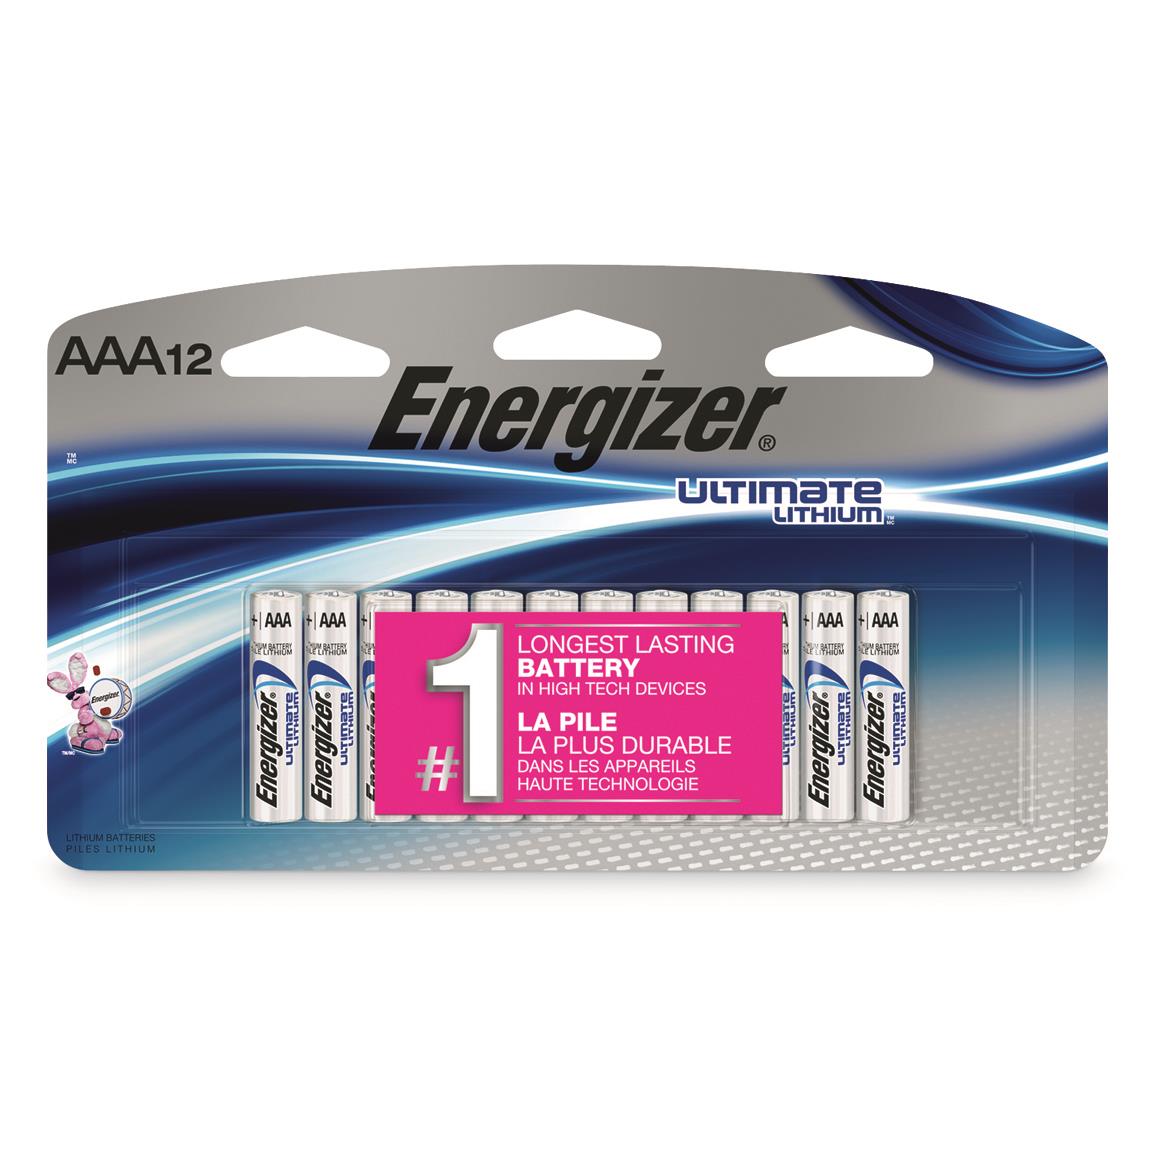 Energizer Ultimate Lithium™ AAA Batteries, 12 Pack